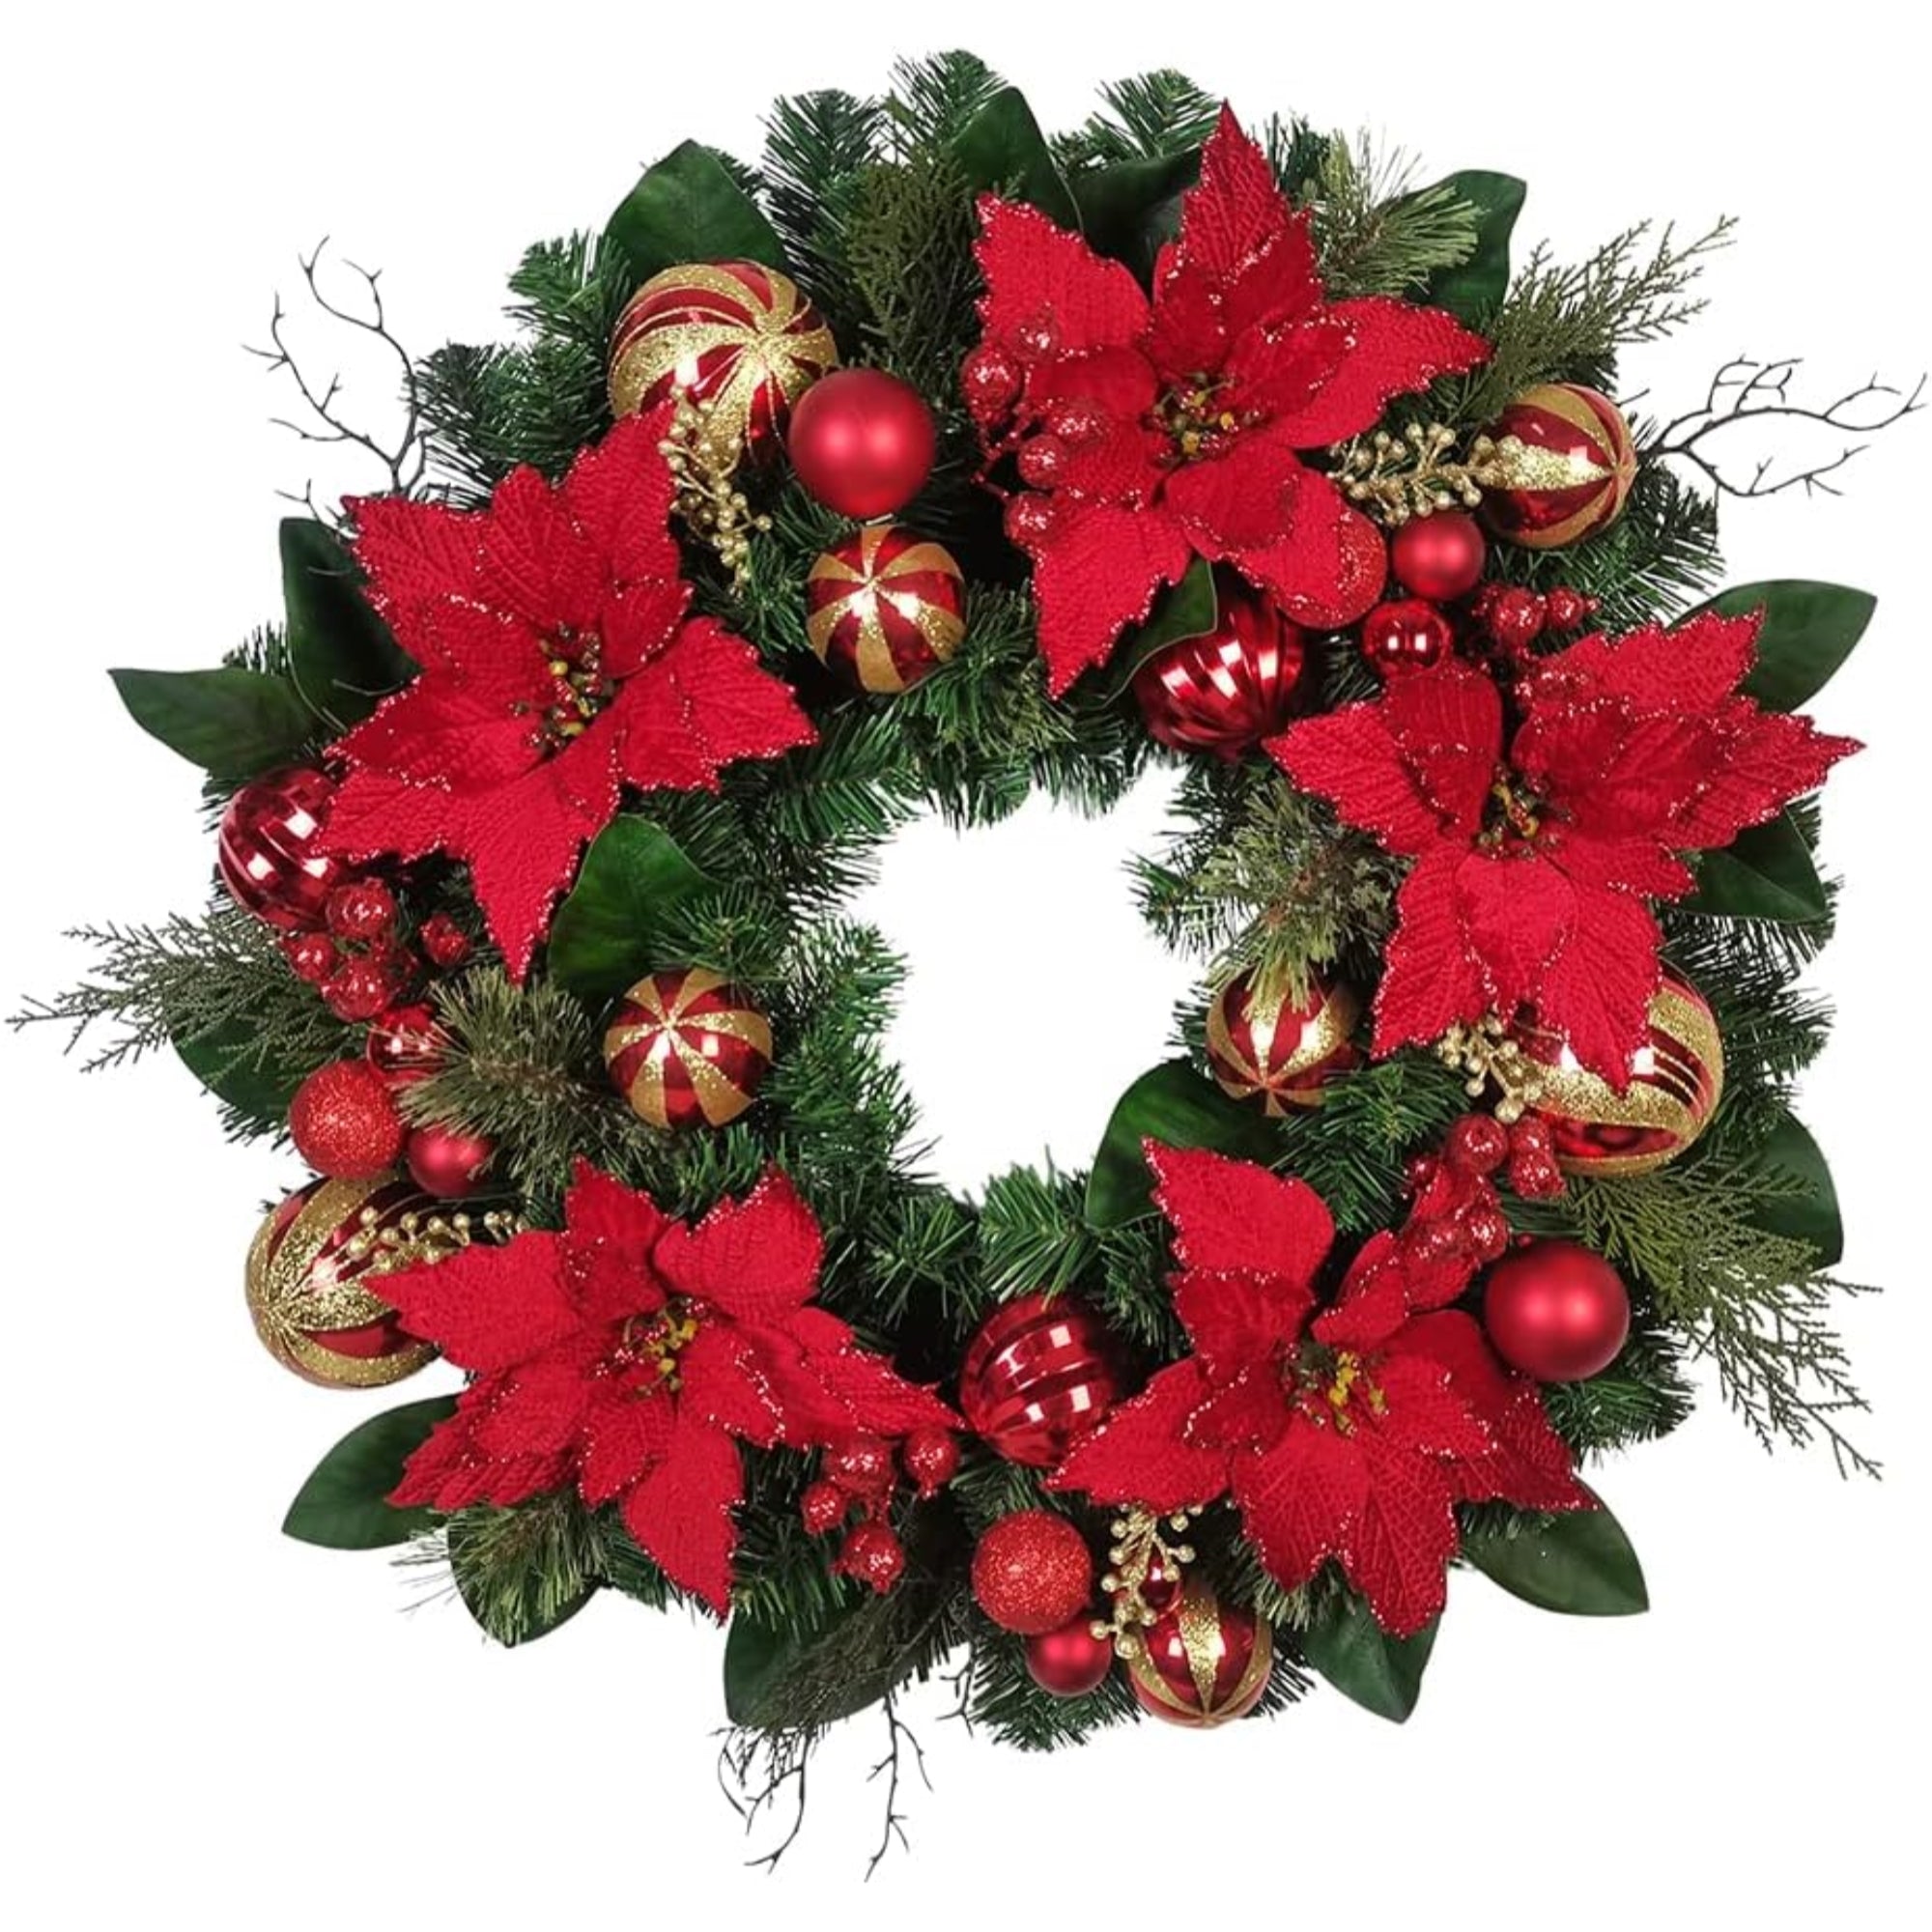 Kurt Adler Unlit Christmas Artificial Decorated Wreath with Ornaments and Poinsettias, Red and Green, 30"